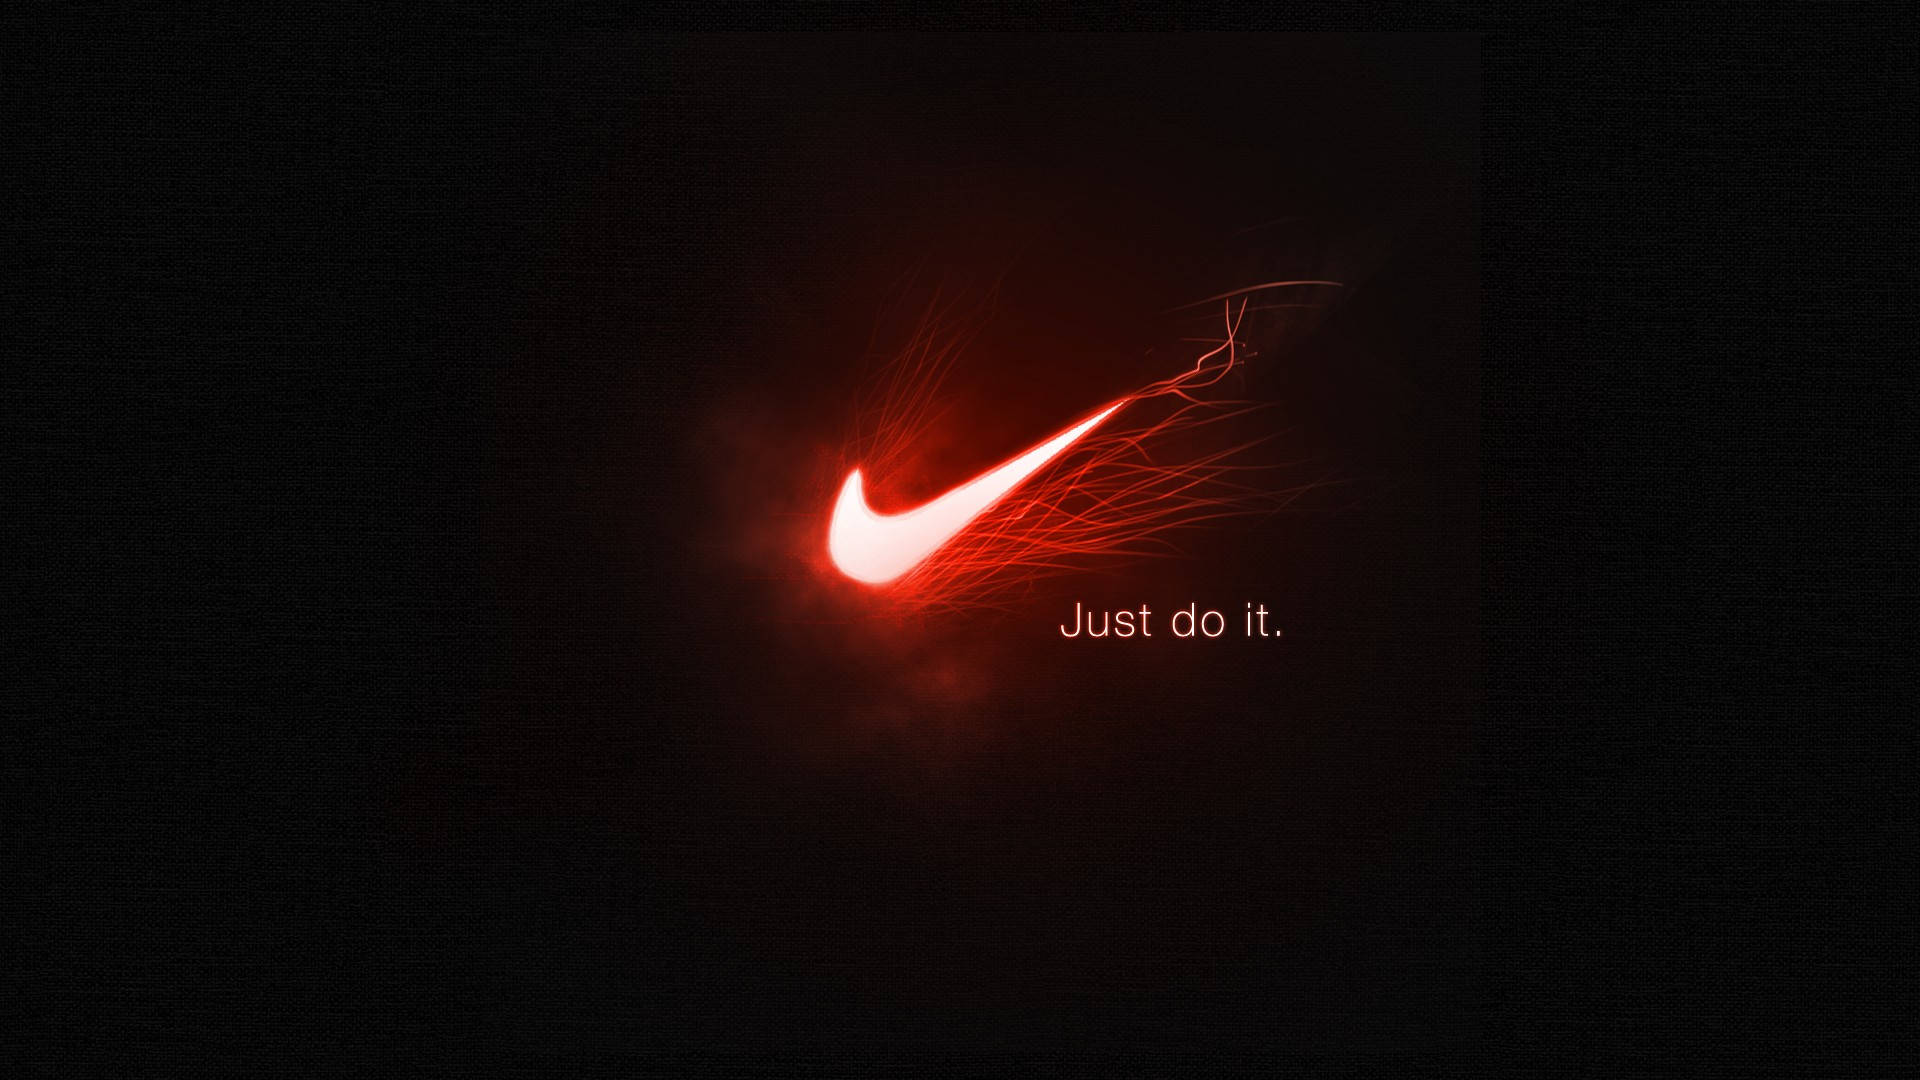 Free Just Do It Wallpaper Downloads, [100+] Just Do It Wallpapers for FREE  